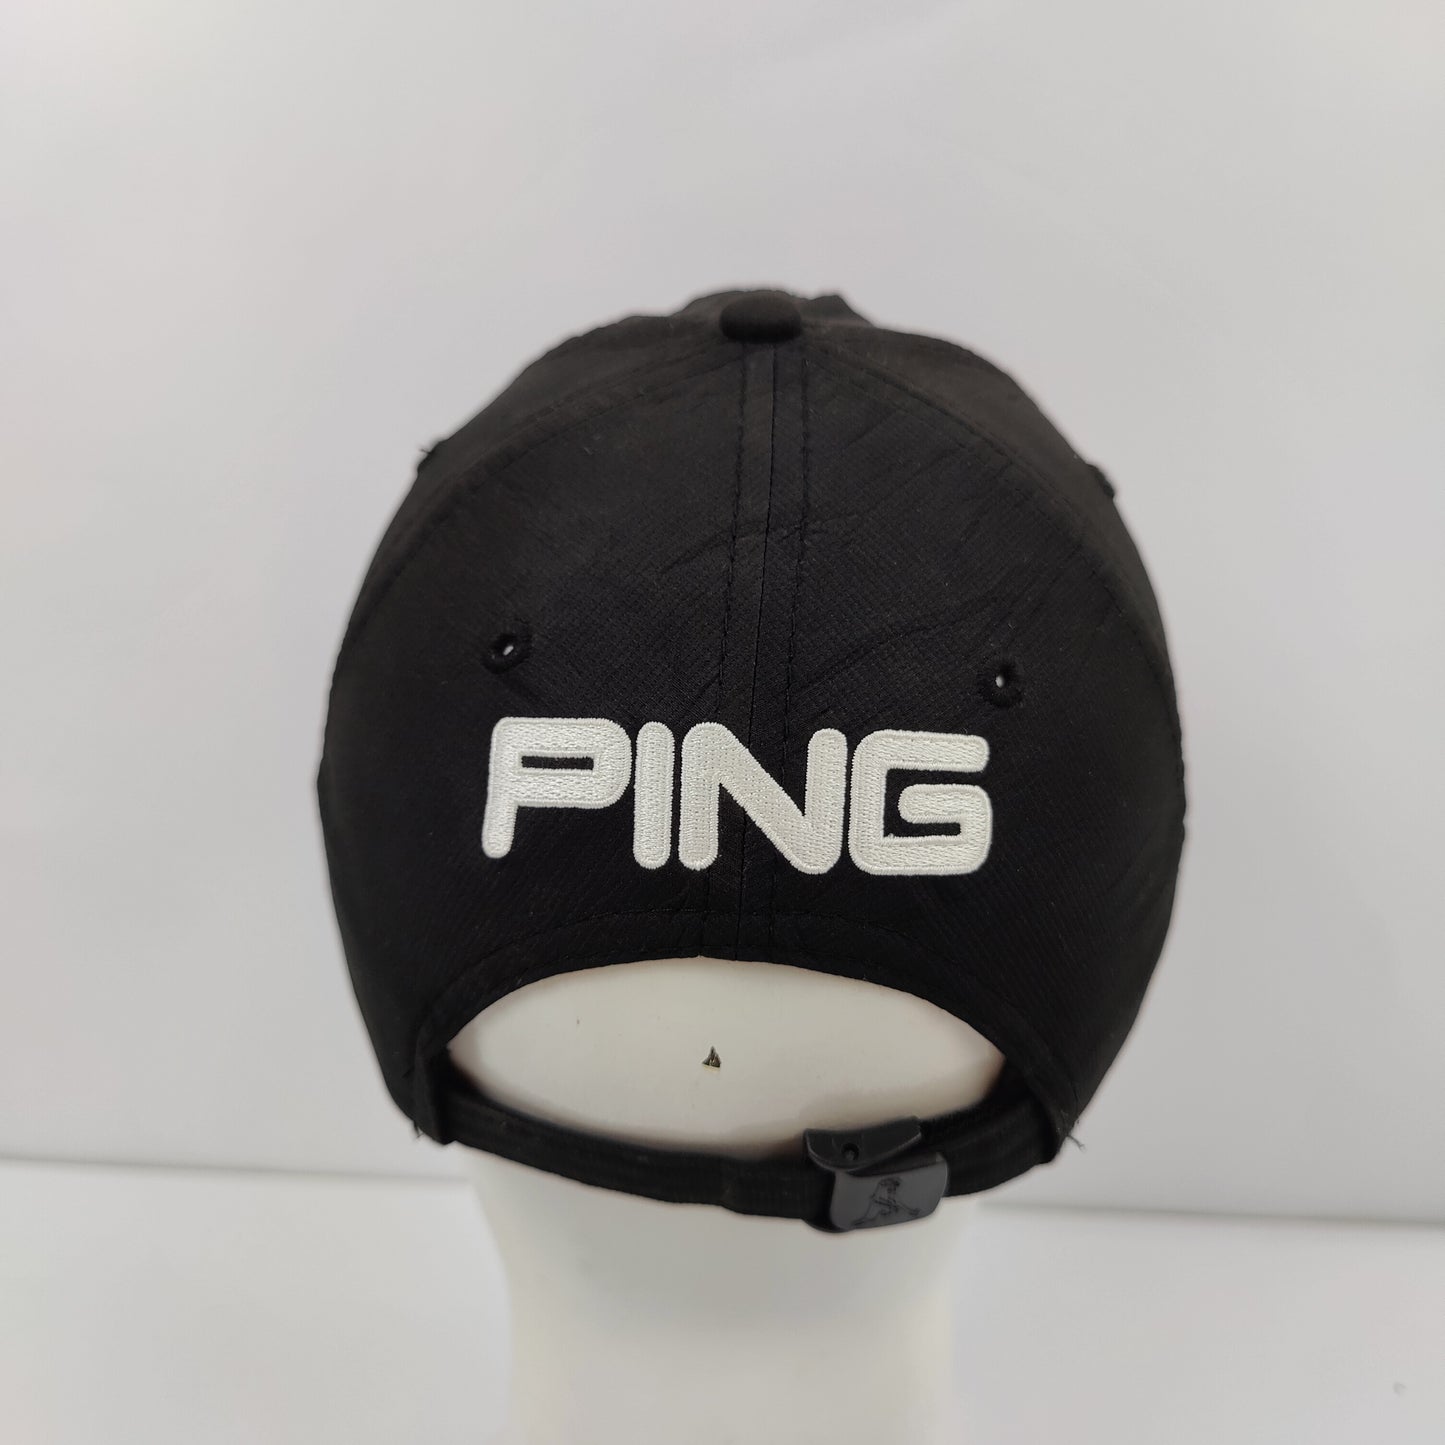 Ping Men's Structured Hat - Black - 1183